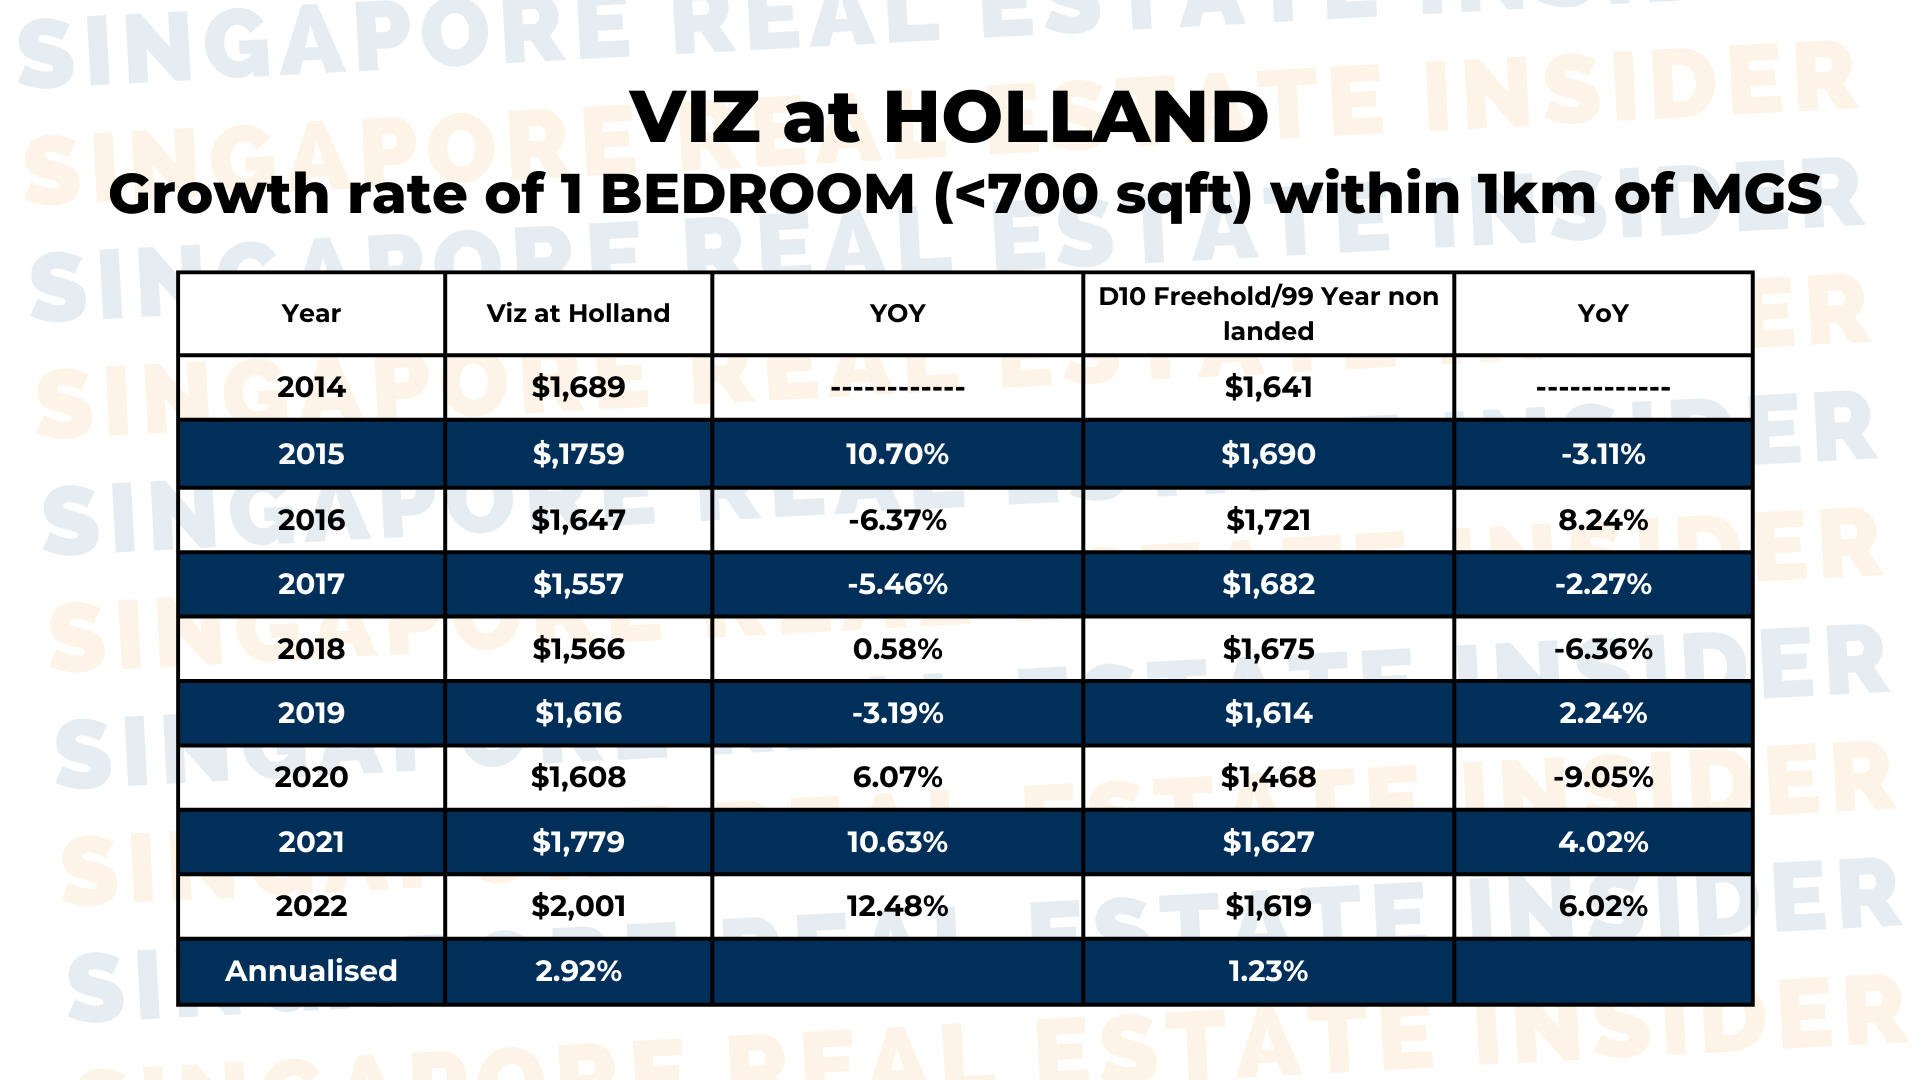 Viz at Holland_Growth rate of 1 bedroom